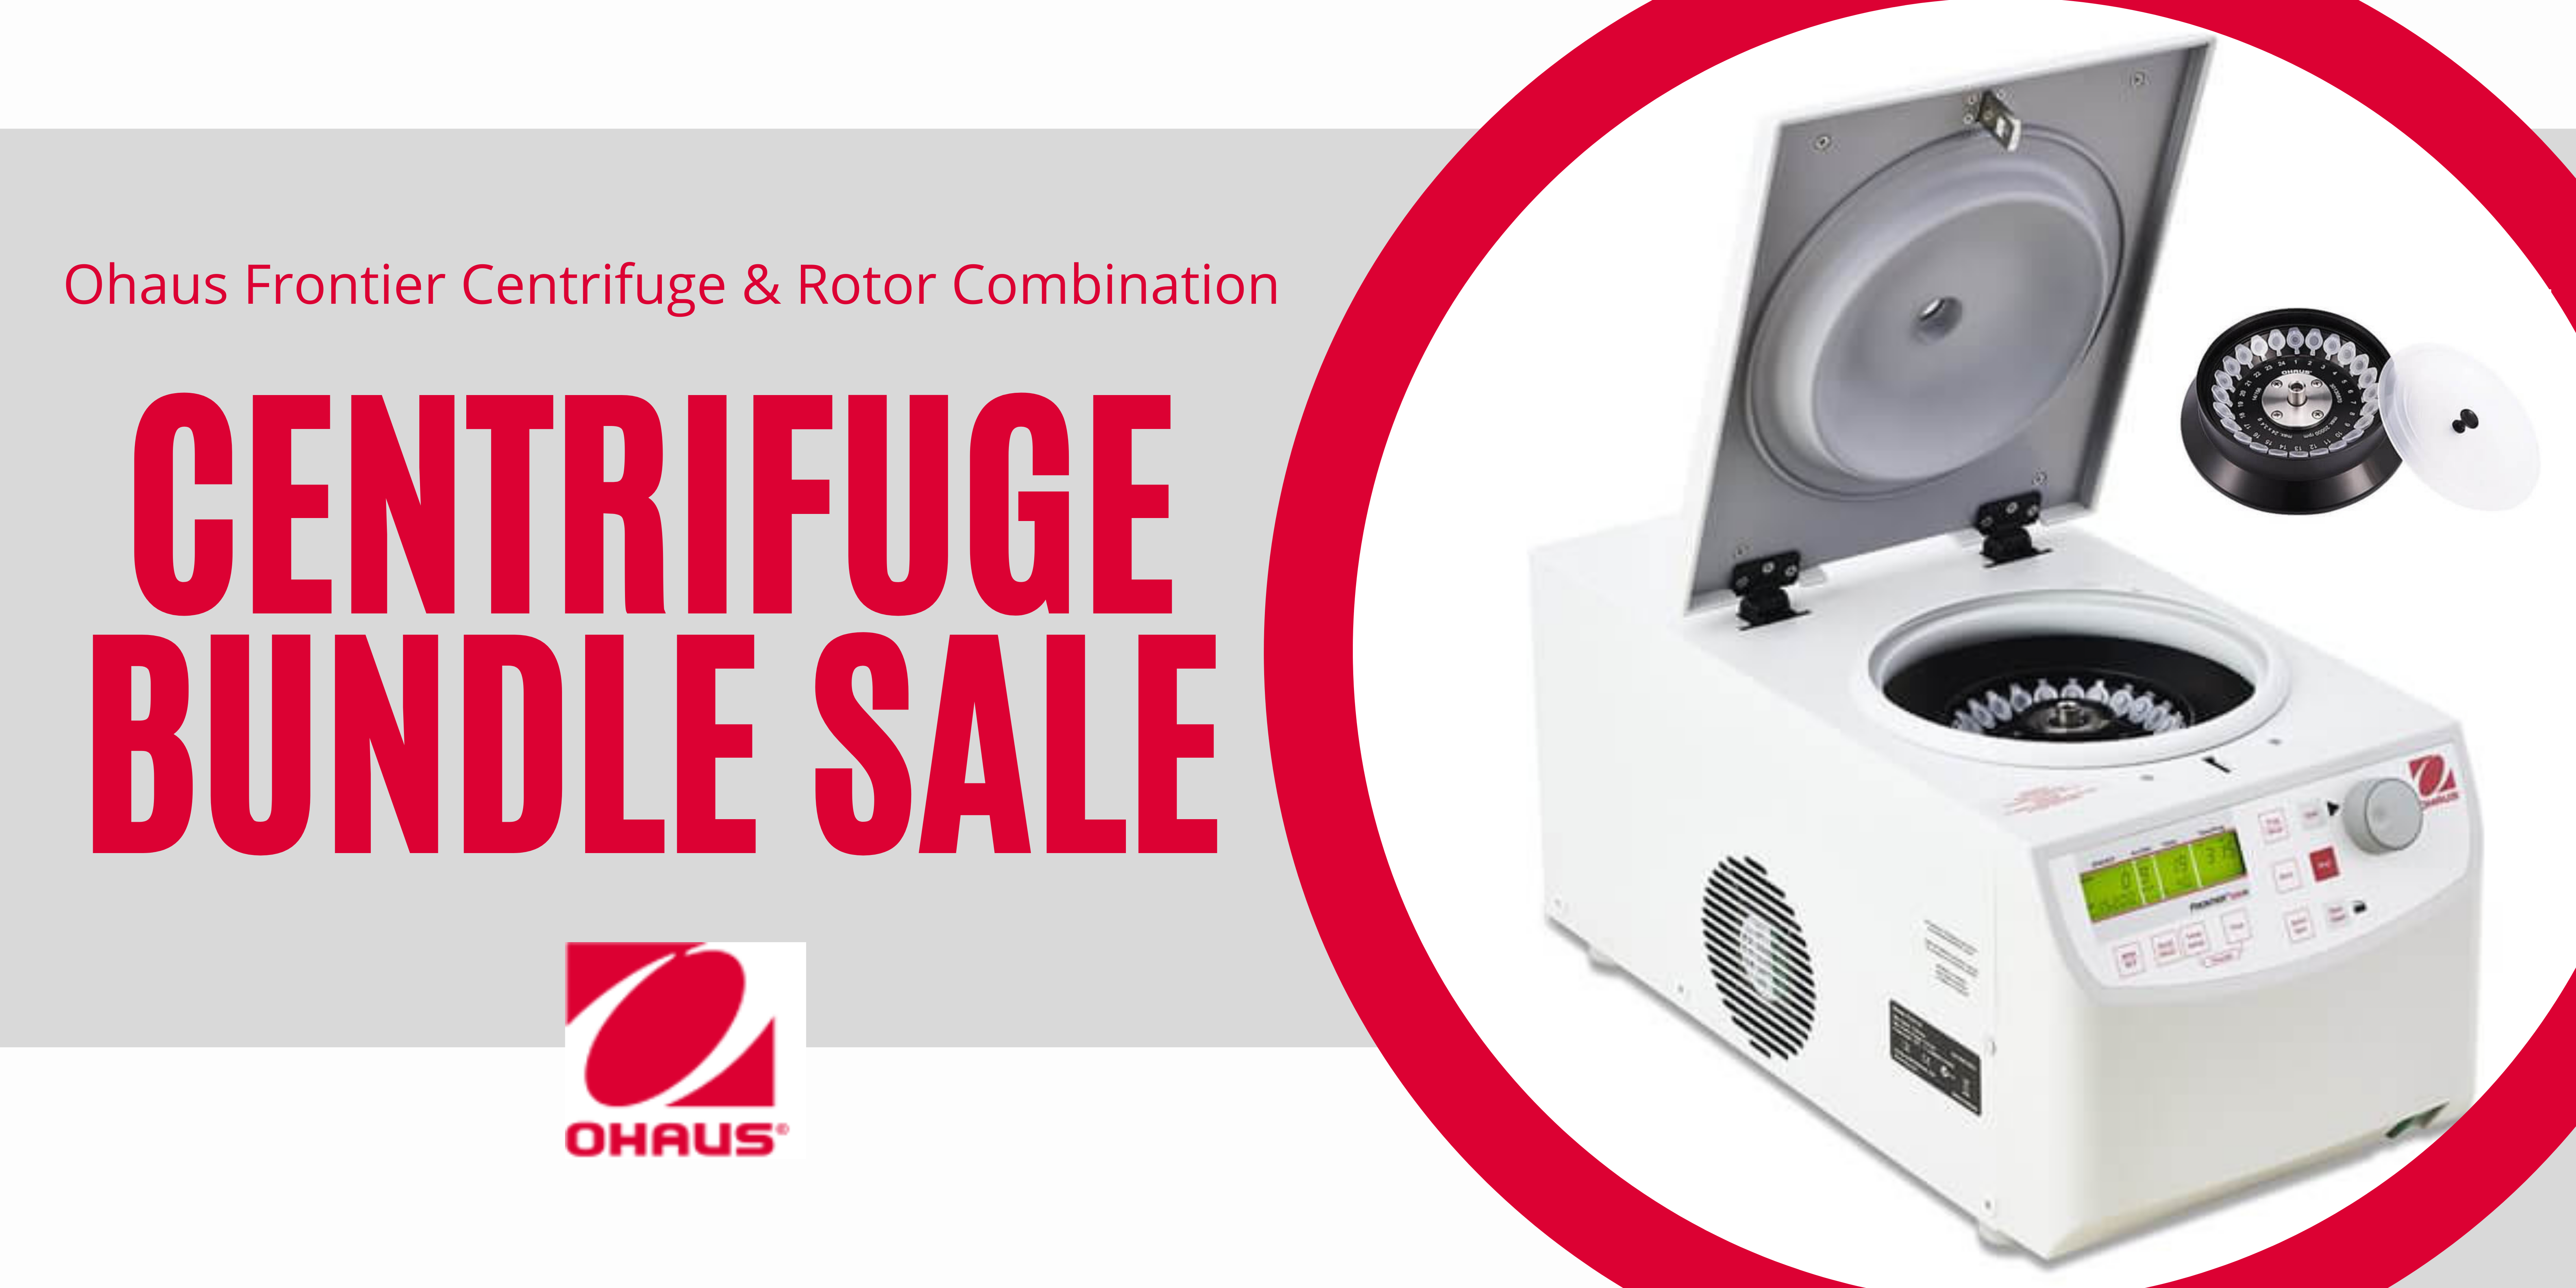 Save up to 40% on Ohaus Centrifuge and Rotor Bundles